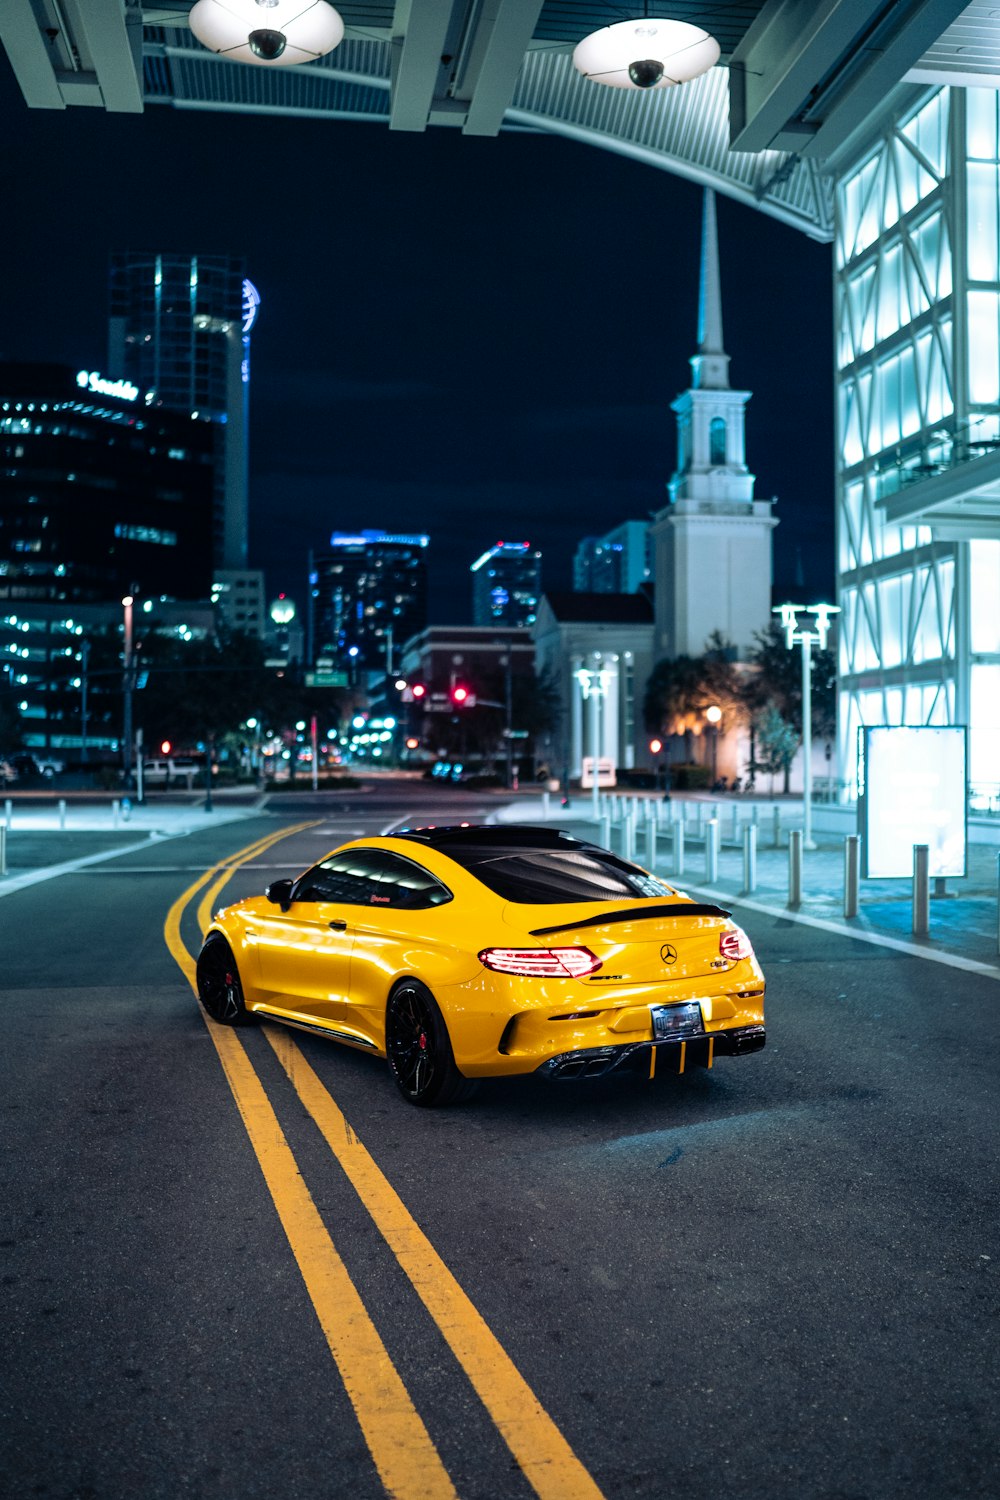 a yellow sports car on a road with buildings in the background